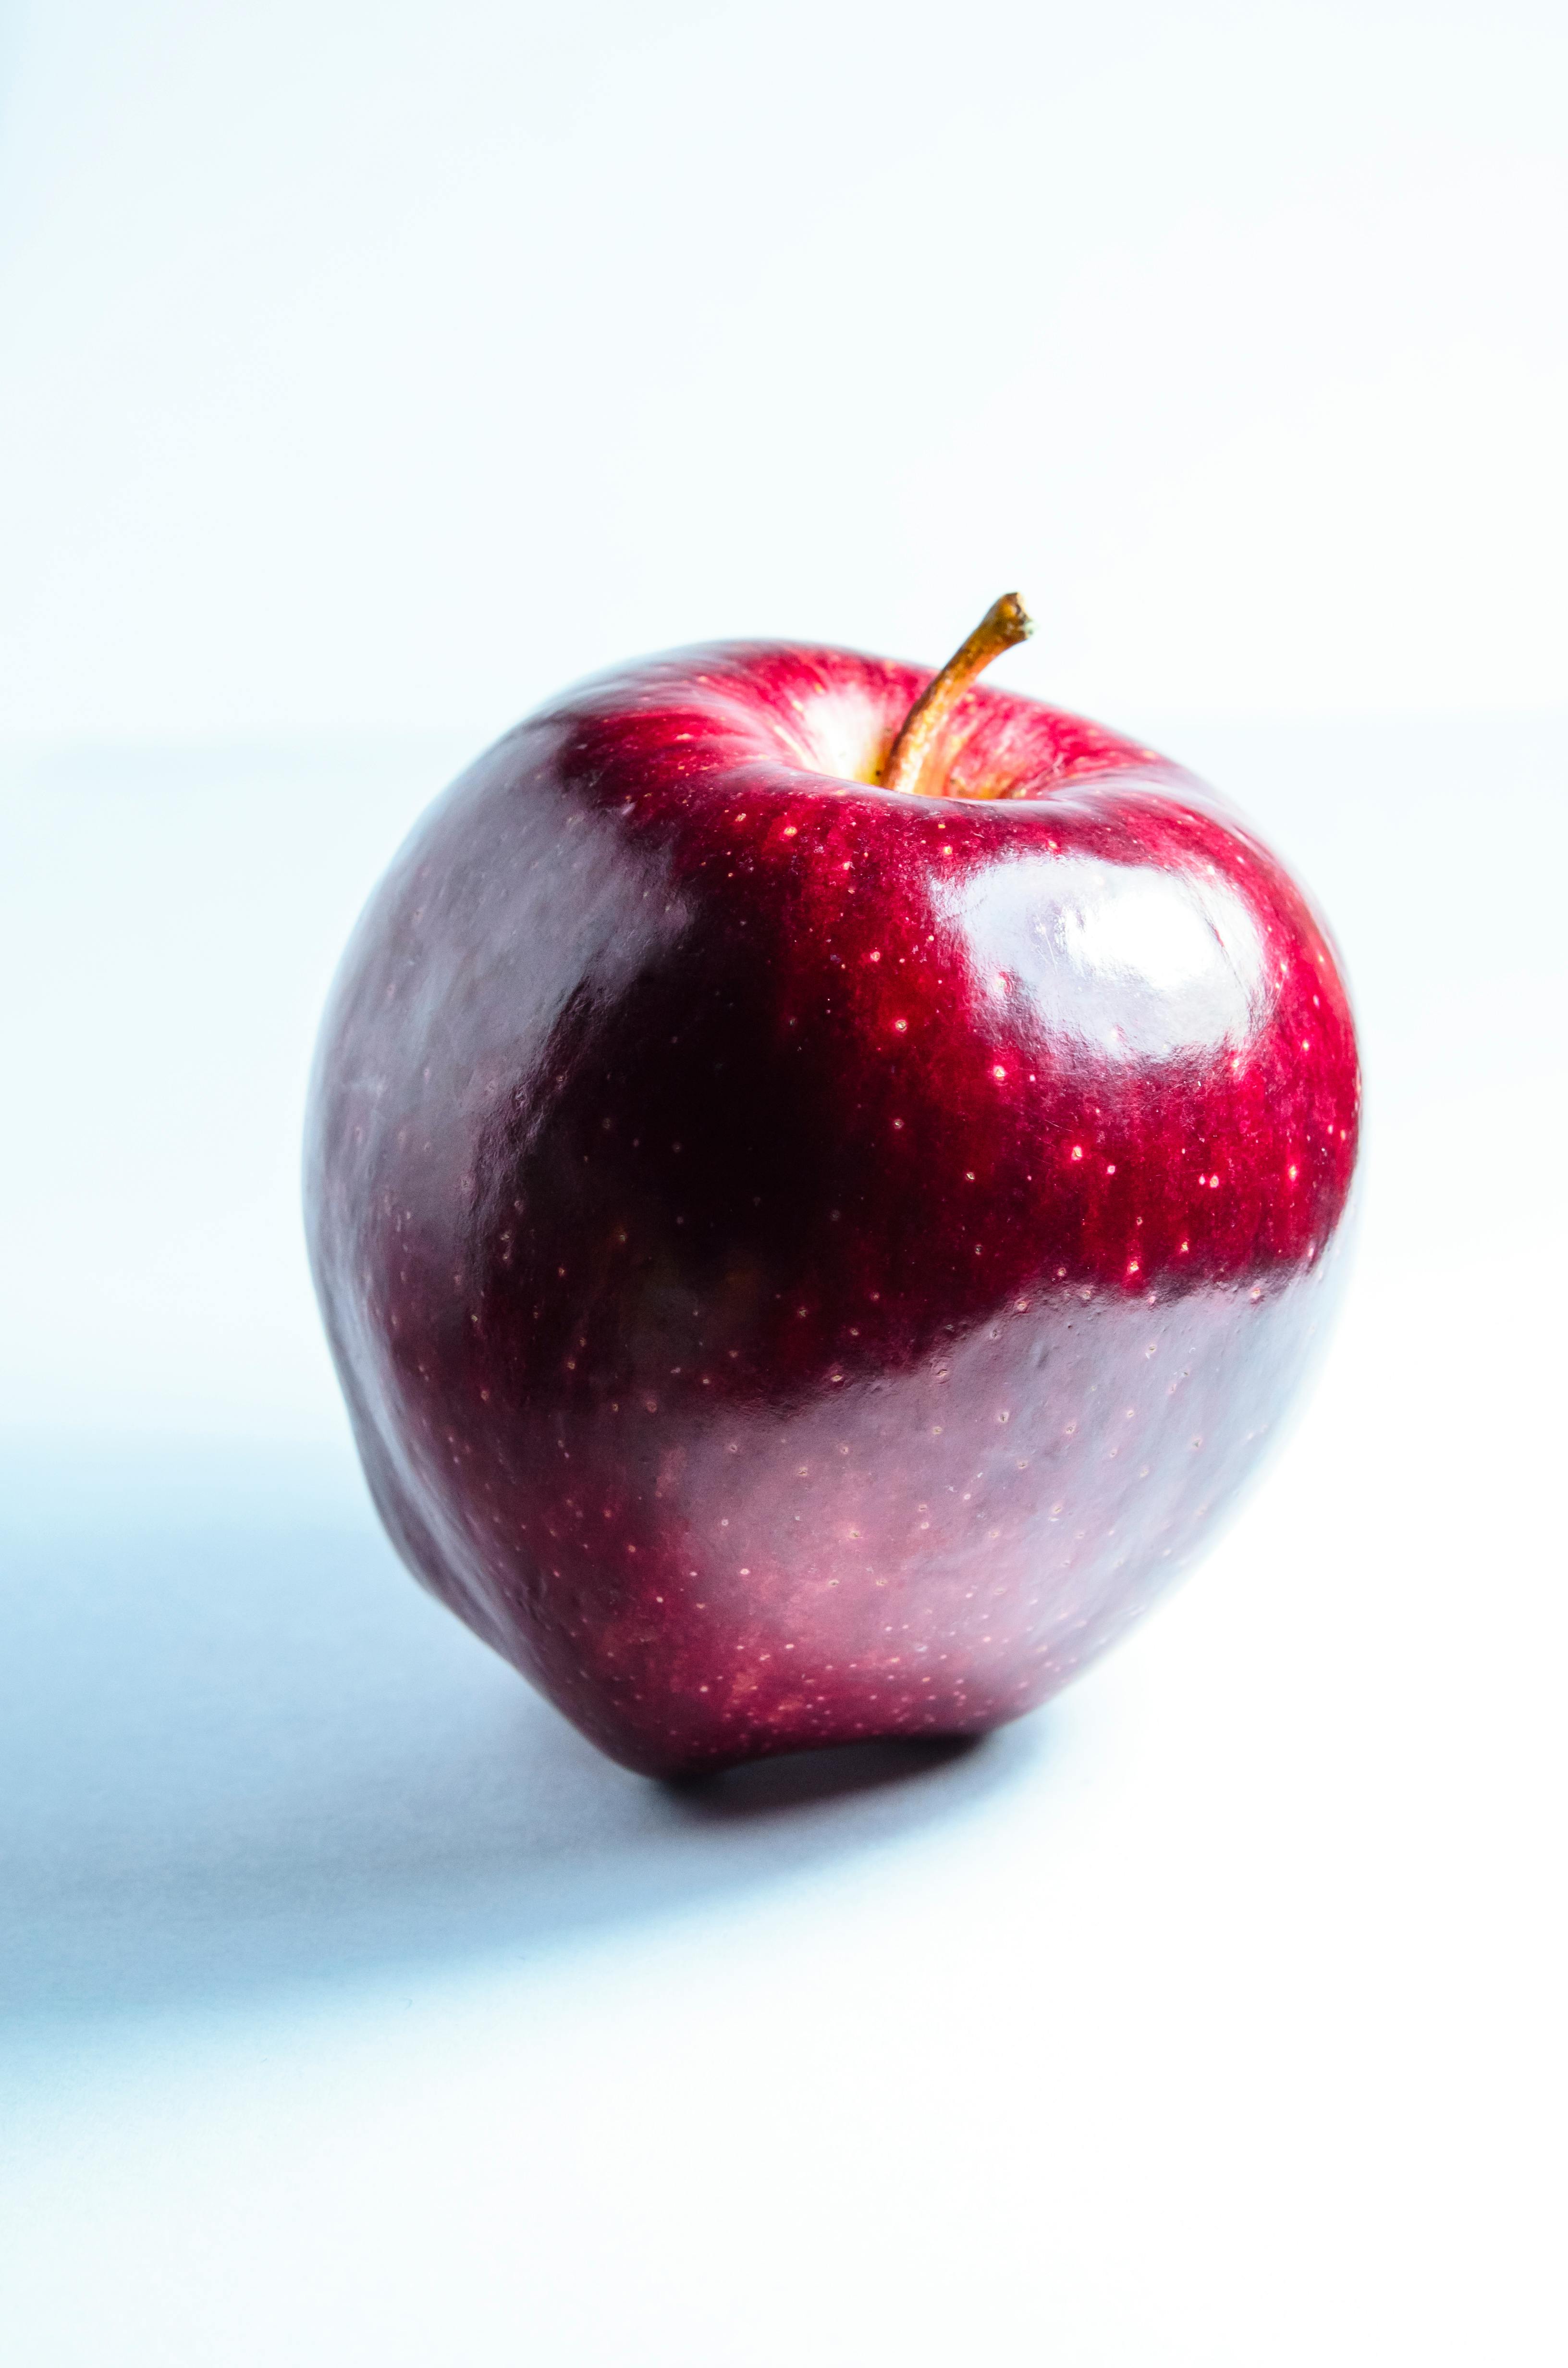 Red Apple Photos, Download The BEST Free Red Apple Stock Photos